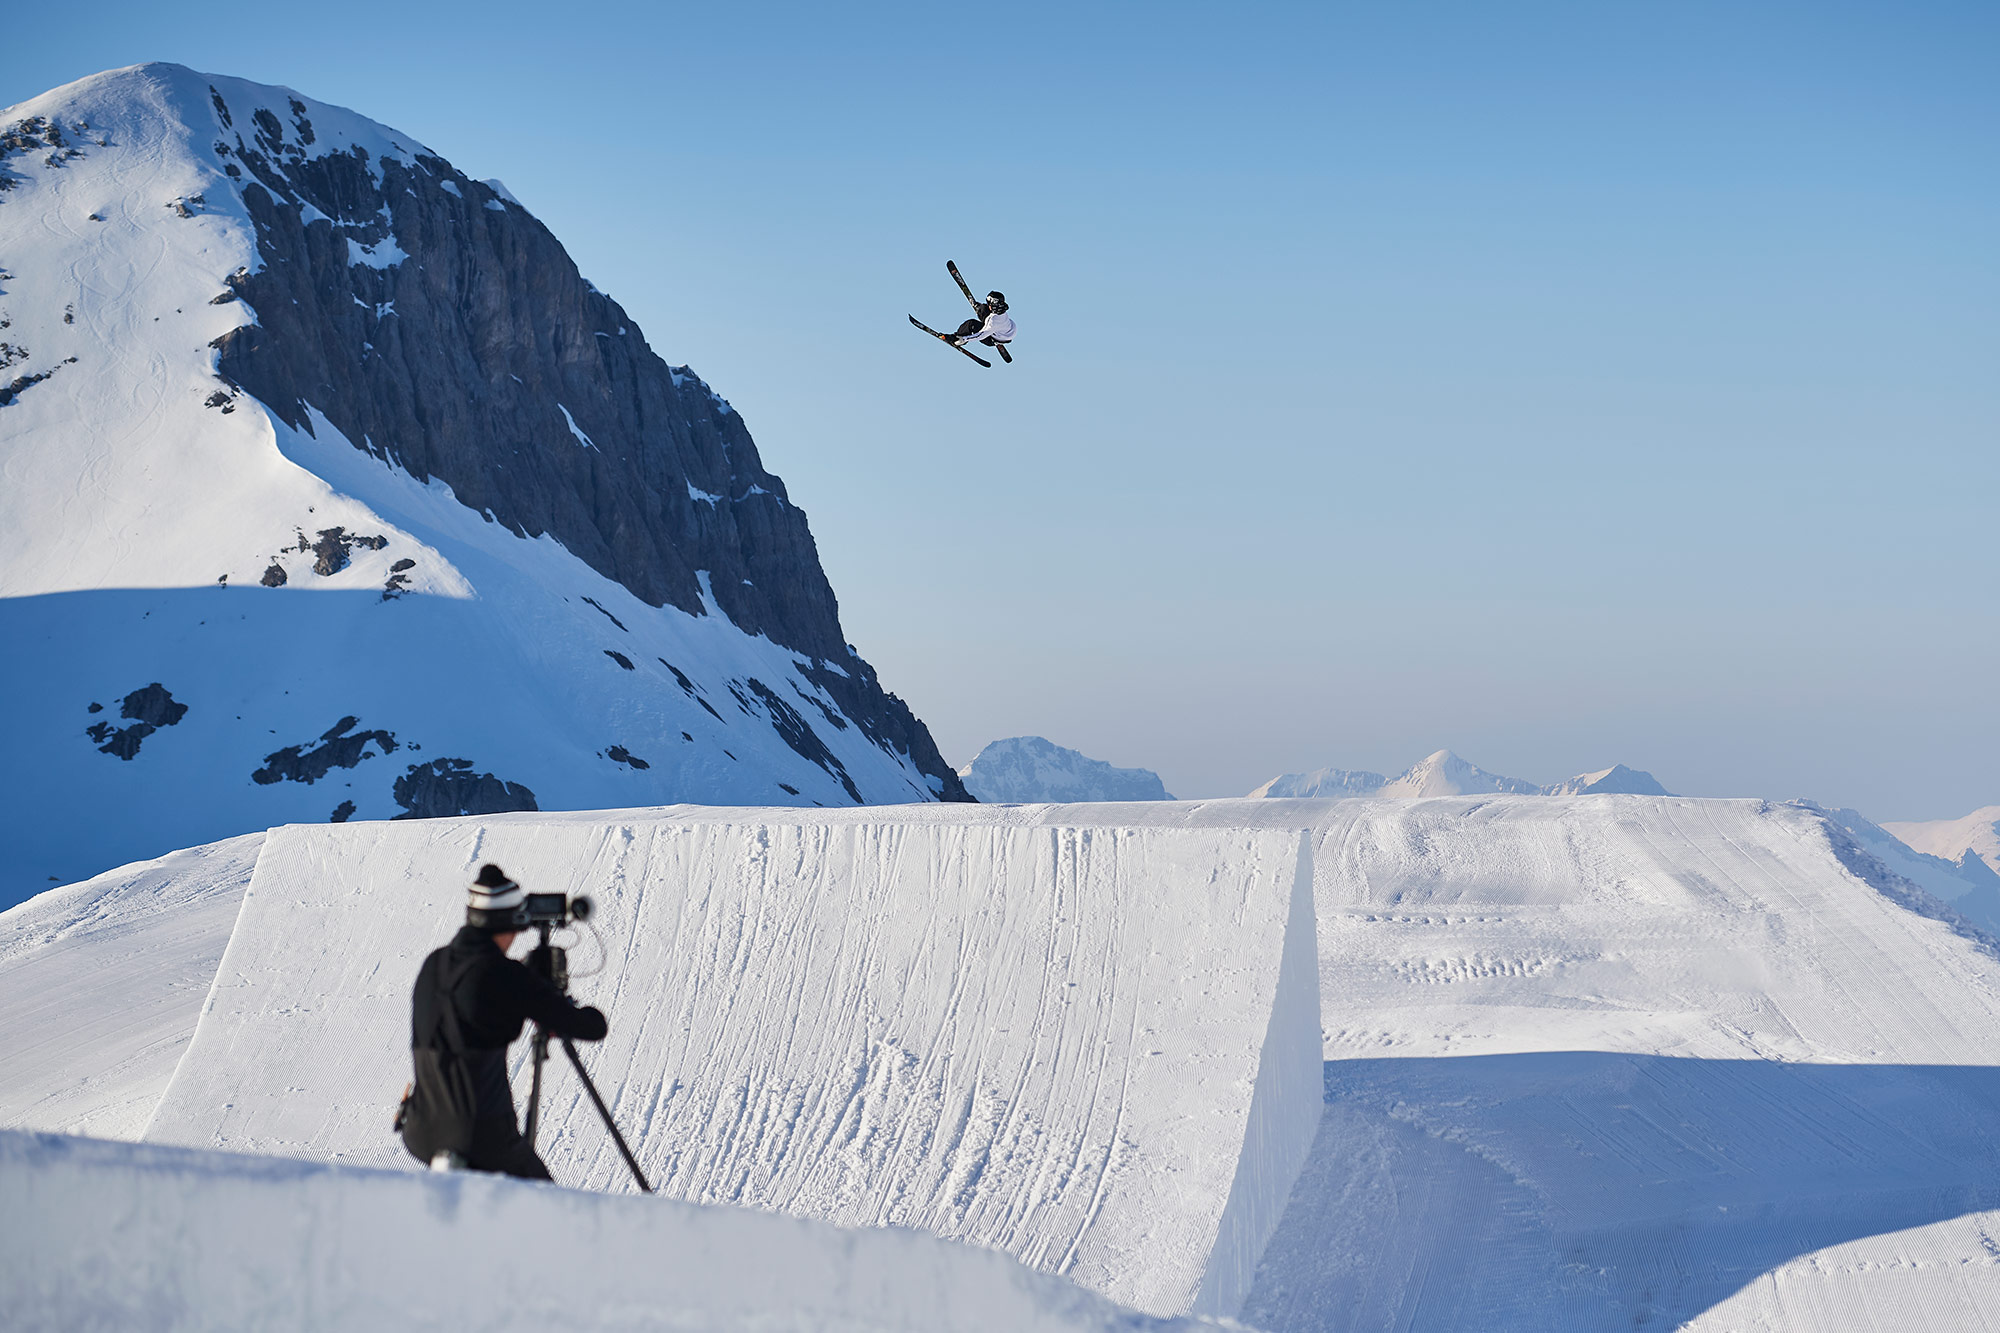 Tim Sivignon hits a jump in Crans-Montana, Switzerland for the Faction Skis movie ROOTS.